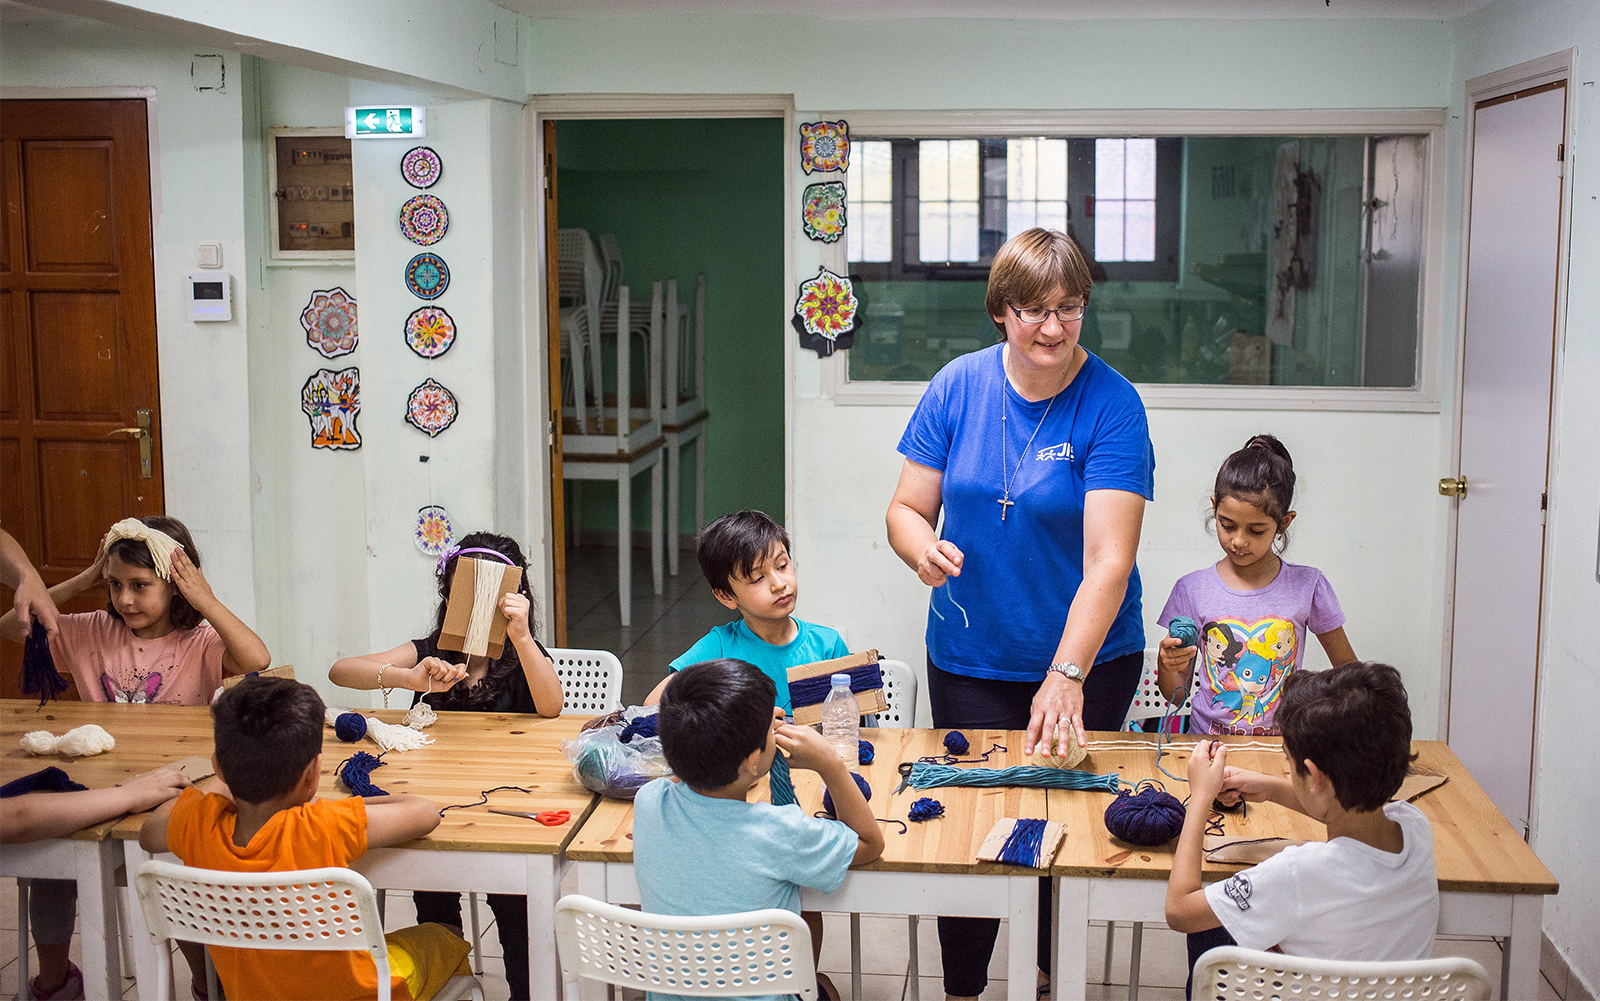 Sister Ewa Pliszczak leads activities with children at the Jesuit Refugee Service's office in Athens, Greece. Photo by Kristof Holvenyi